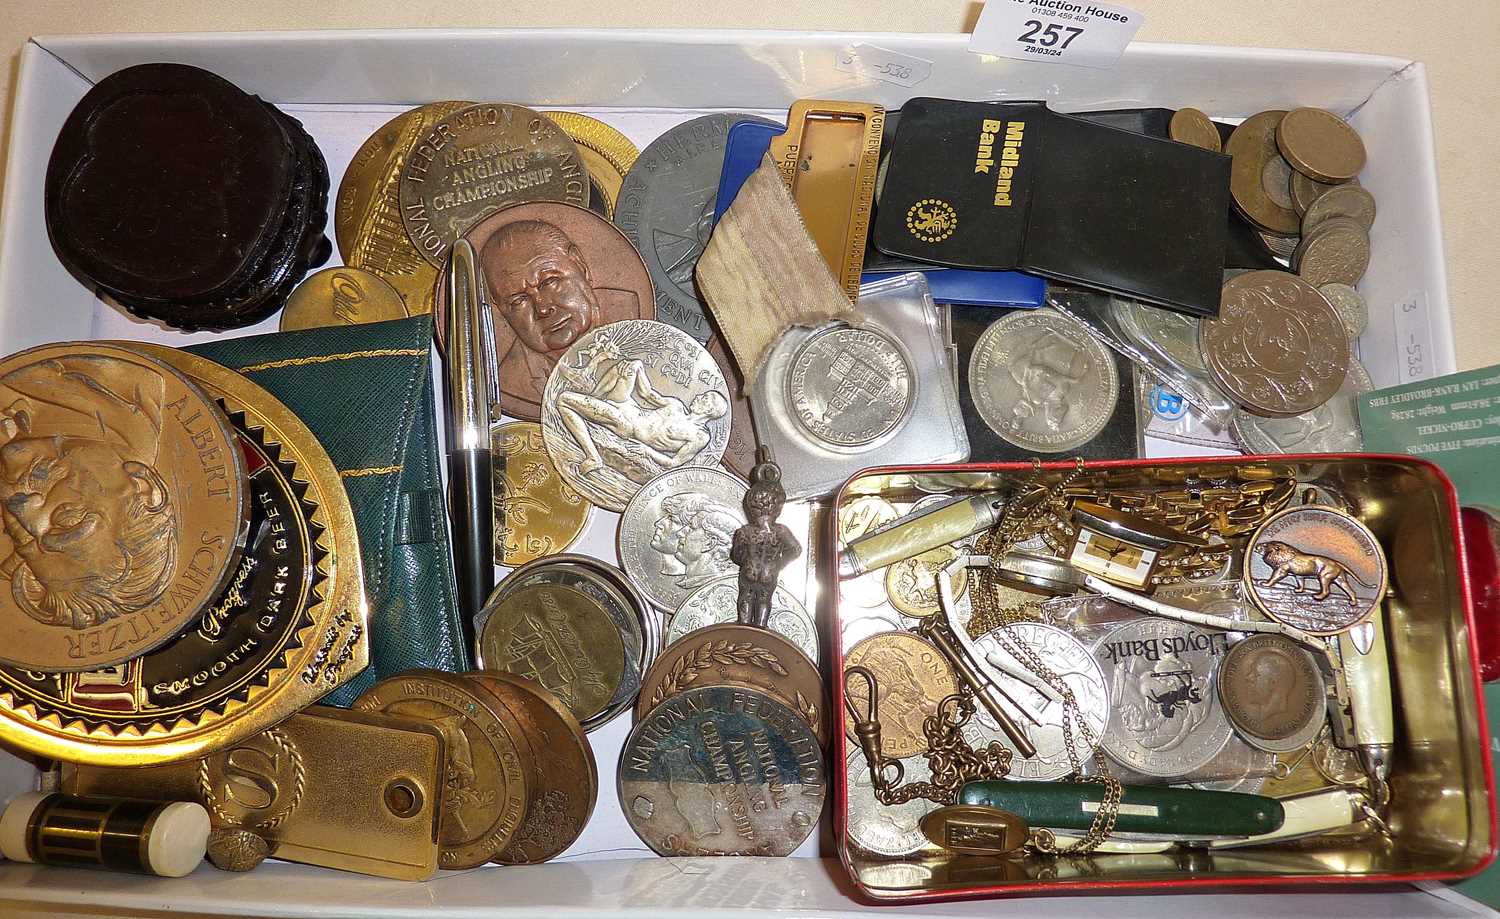 Old coins, medallions, wrist watches, penknives, etc.